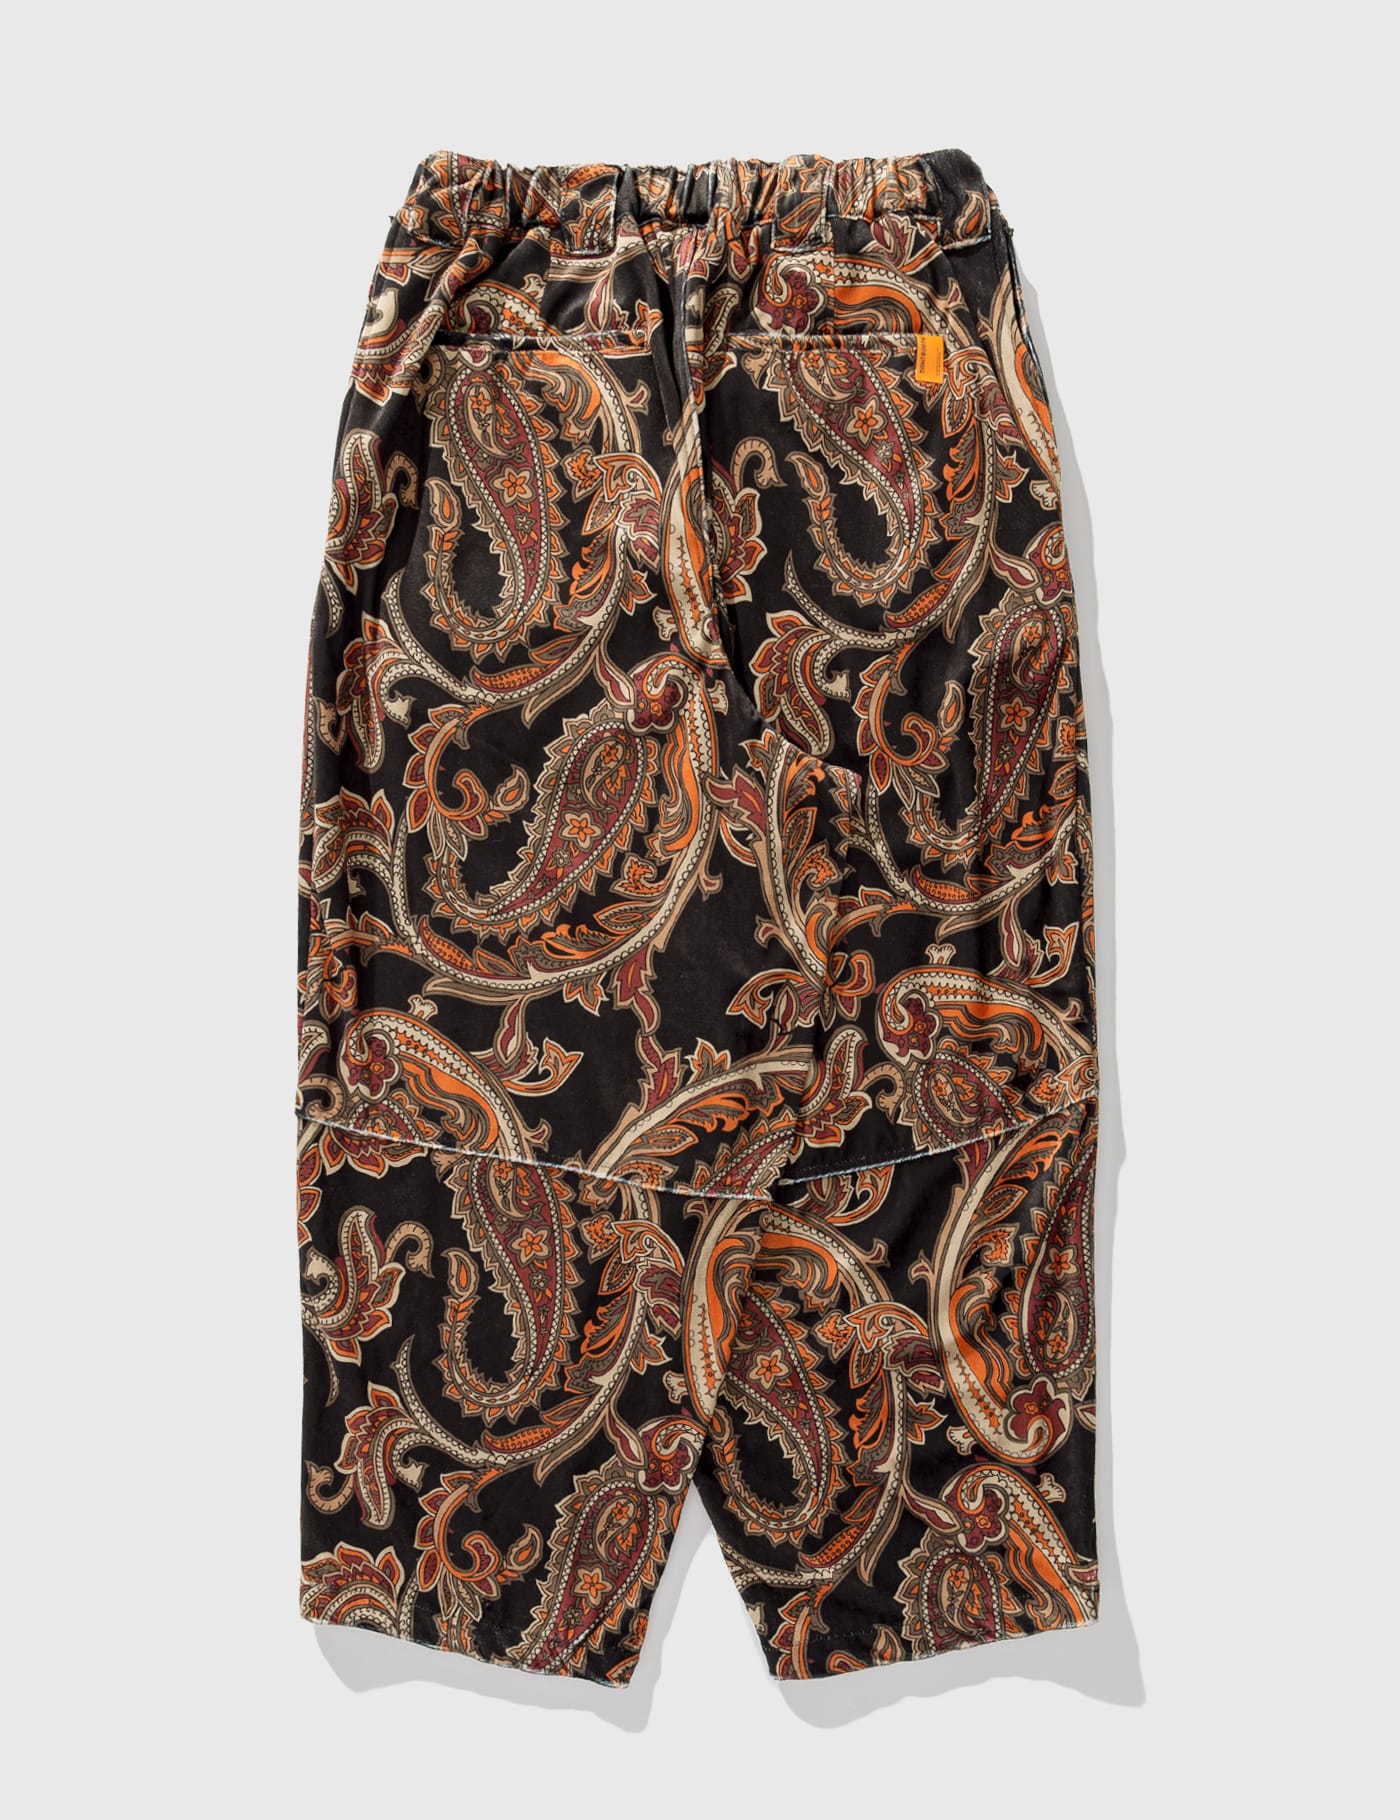 Tightbooth - PAISLEY VELOR BALLOON PANTS | HBX - Globally Curated 